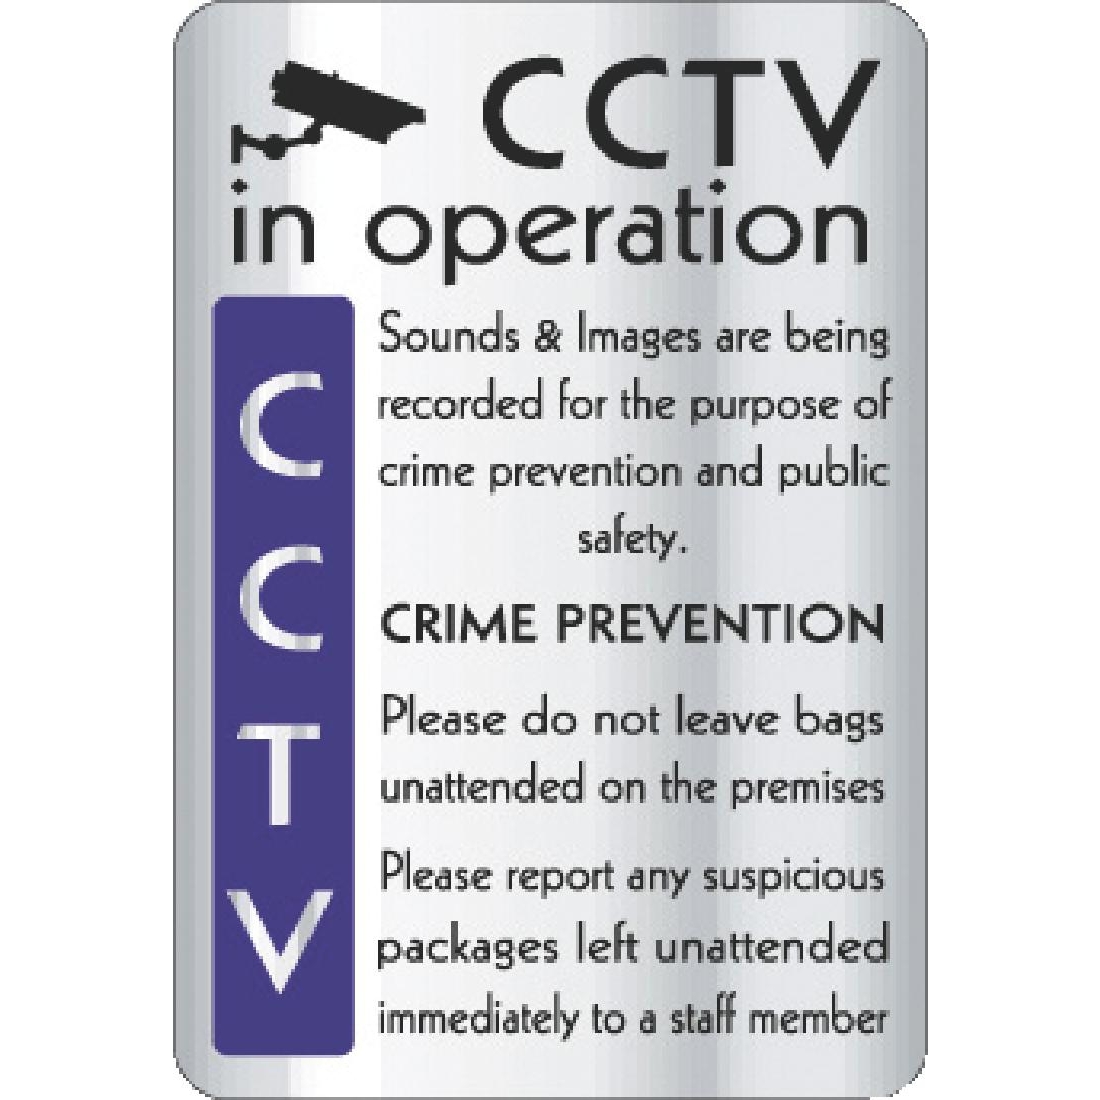 cctv and crime reduction